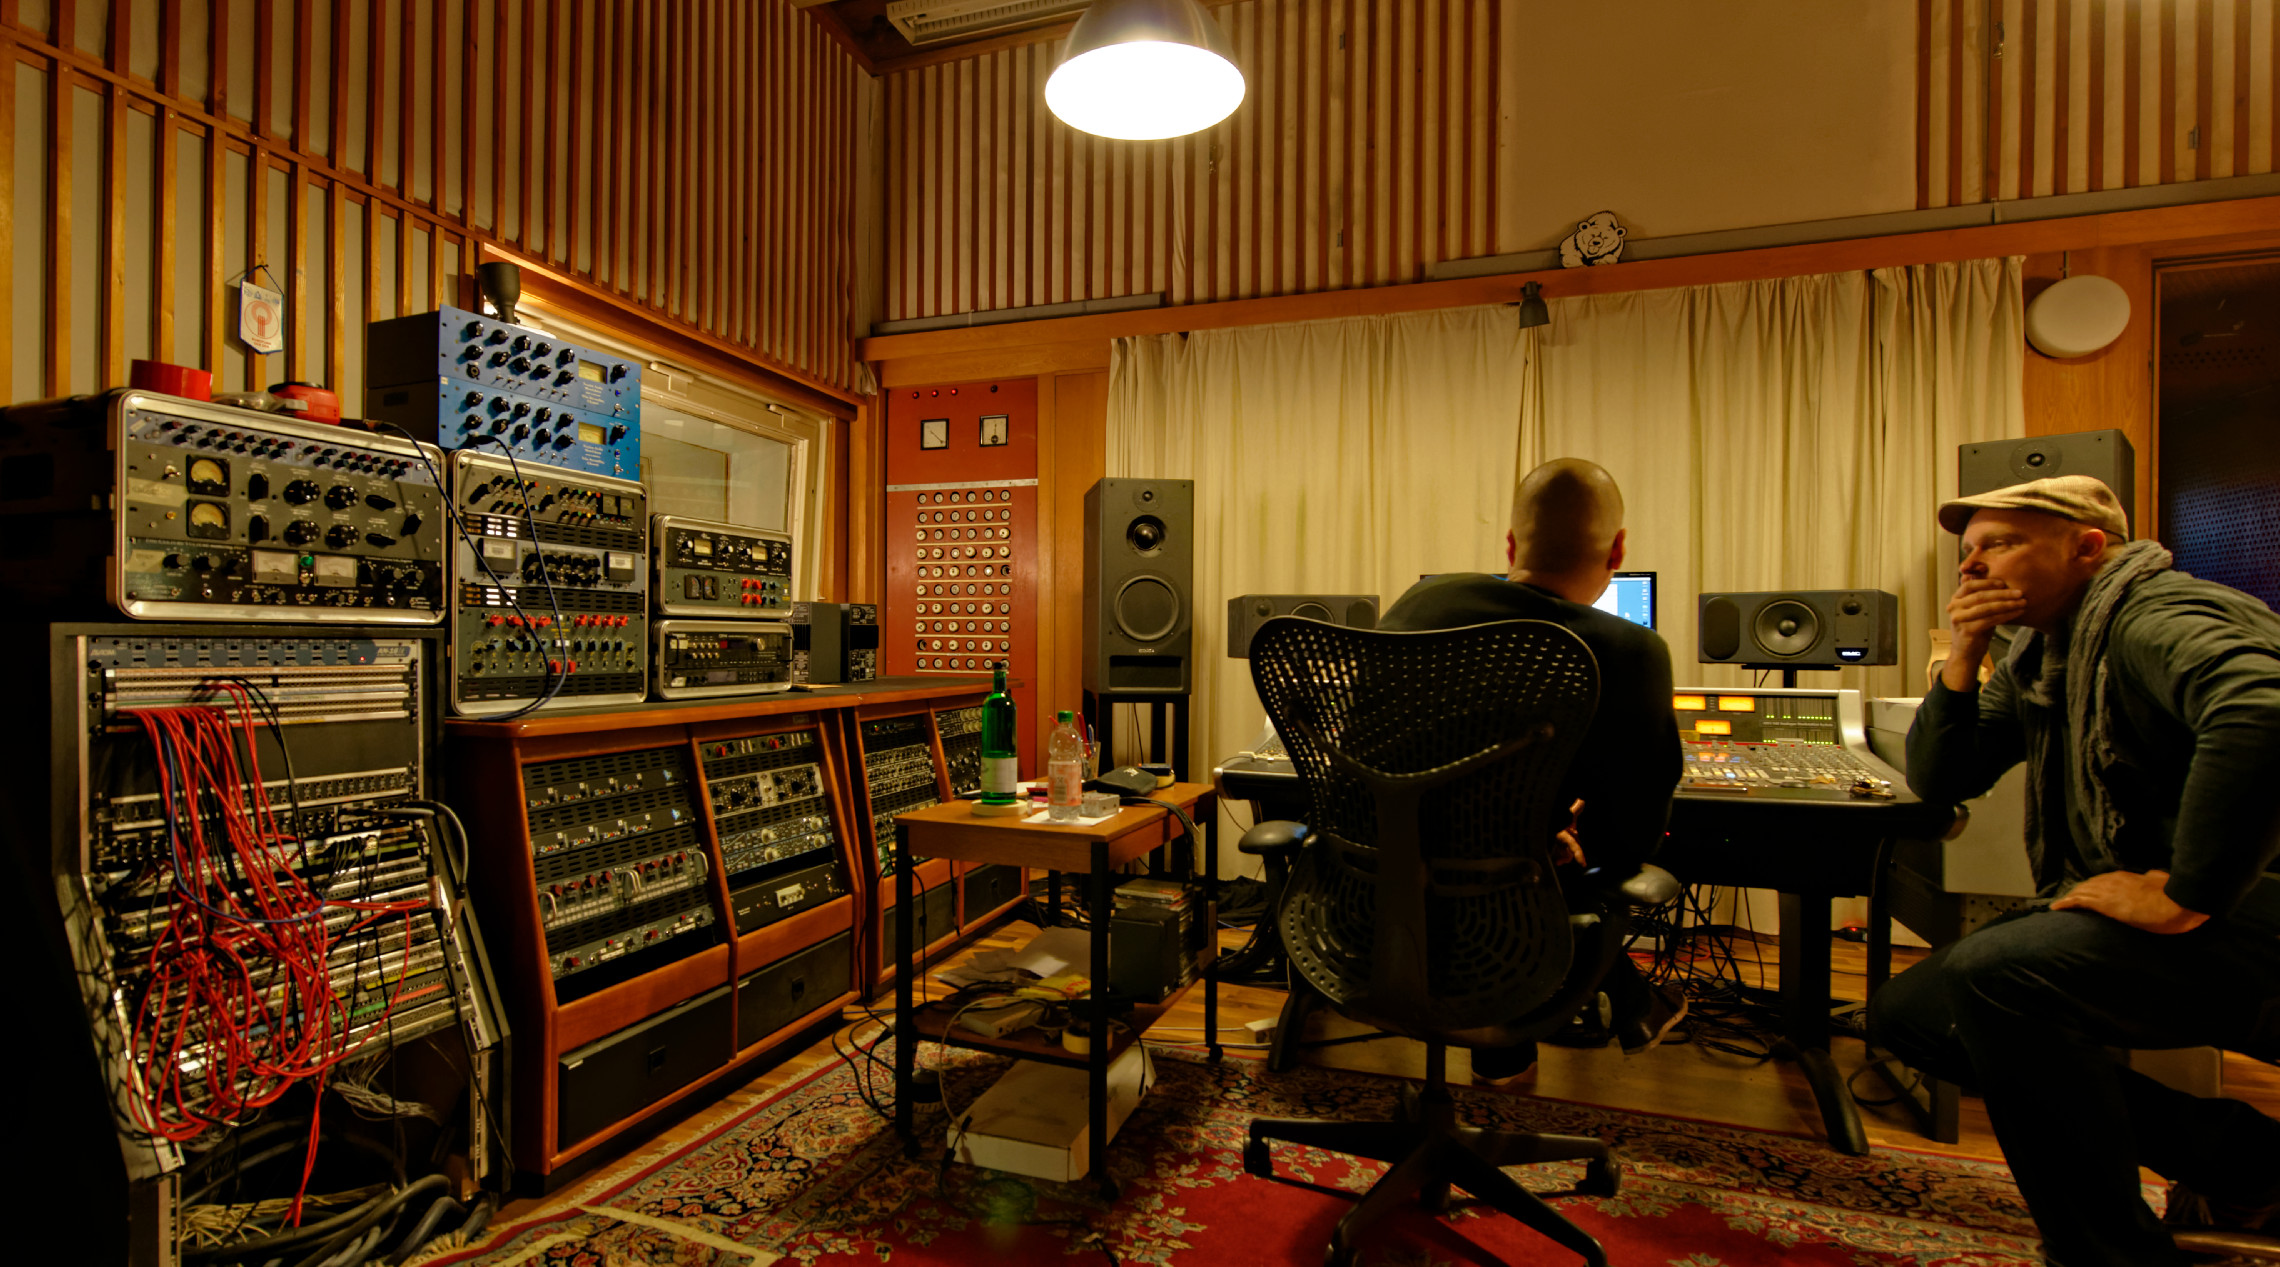 We've visited the famous Funkhaus Studio in Berlin Nalepastrasse